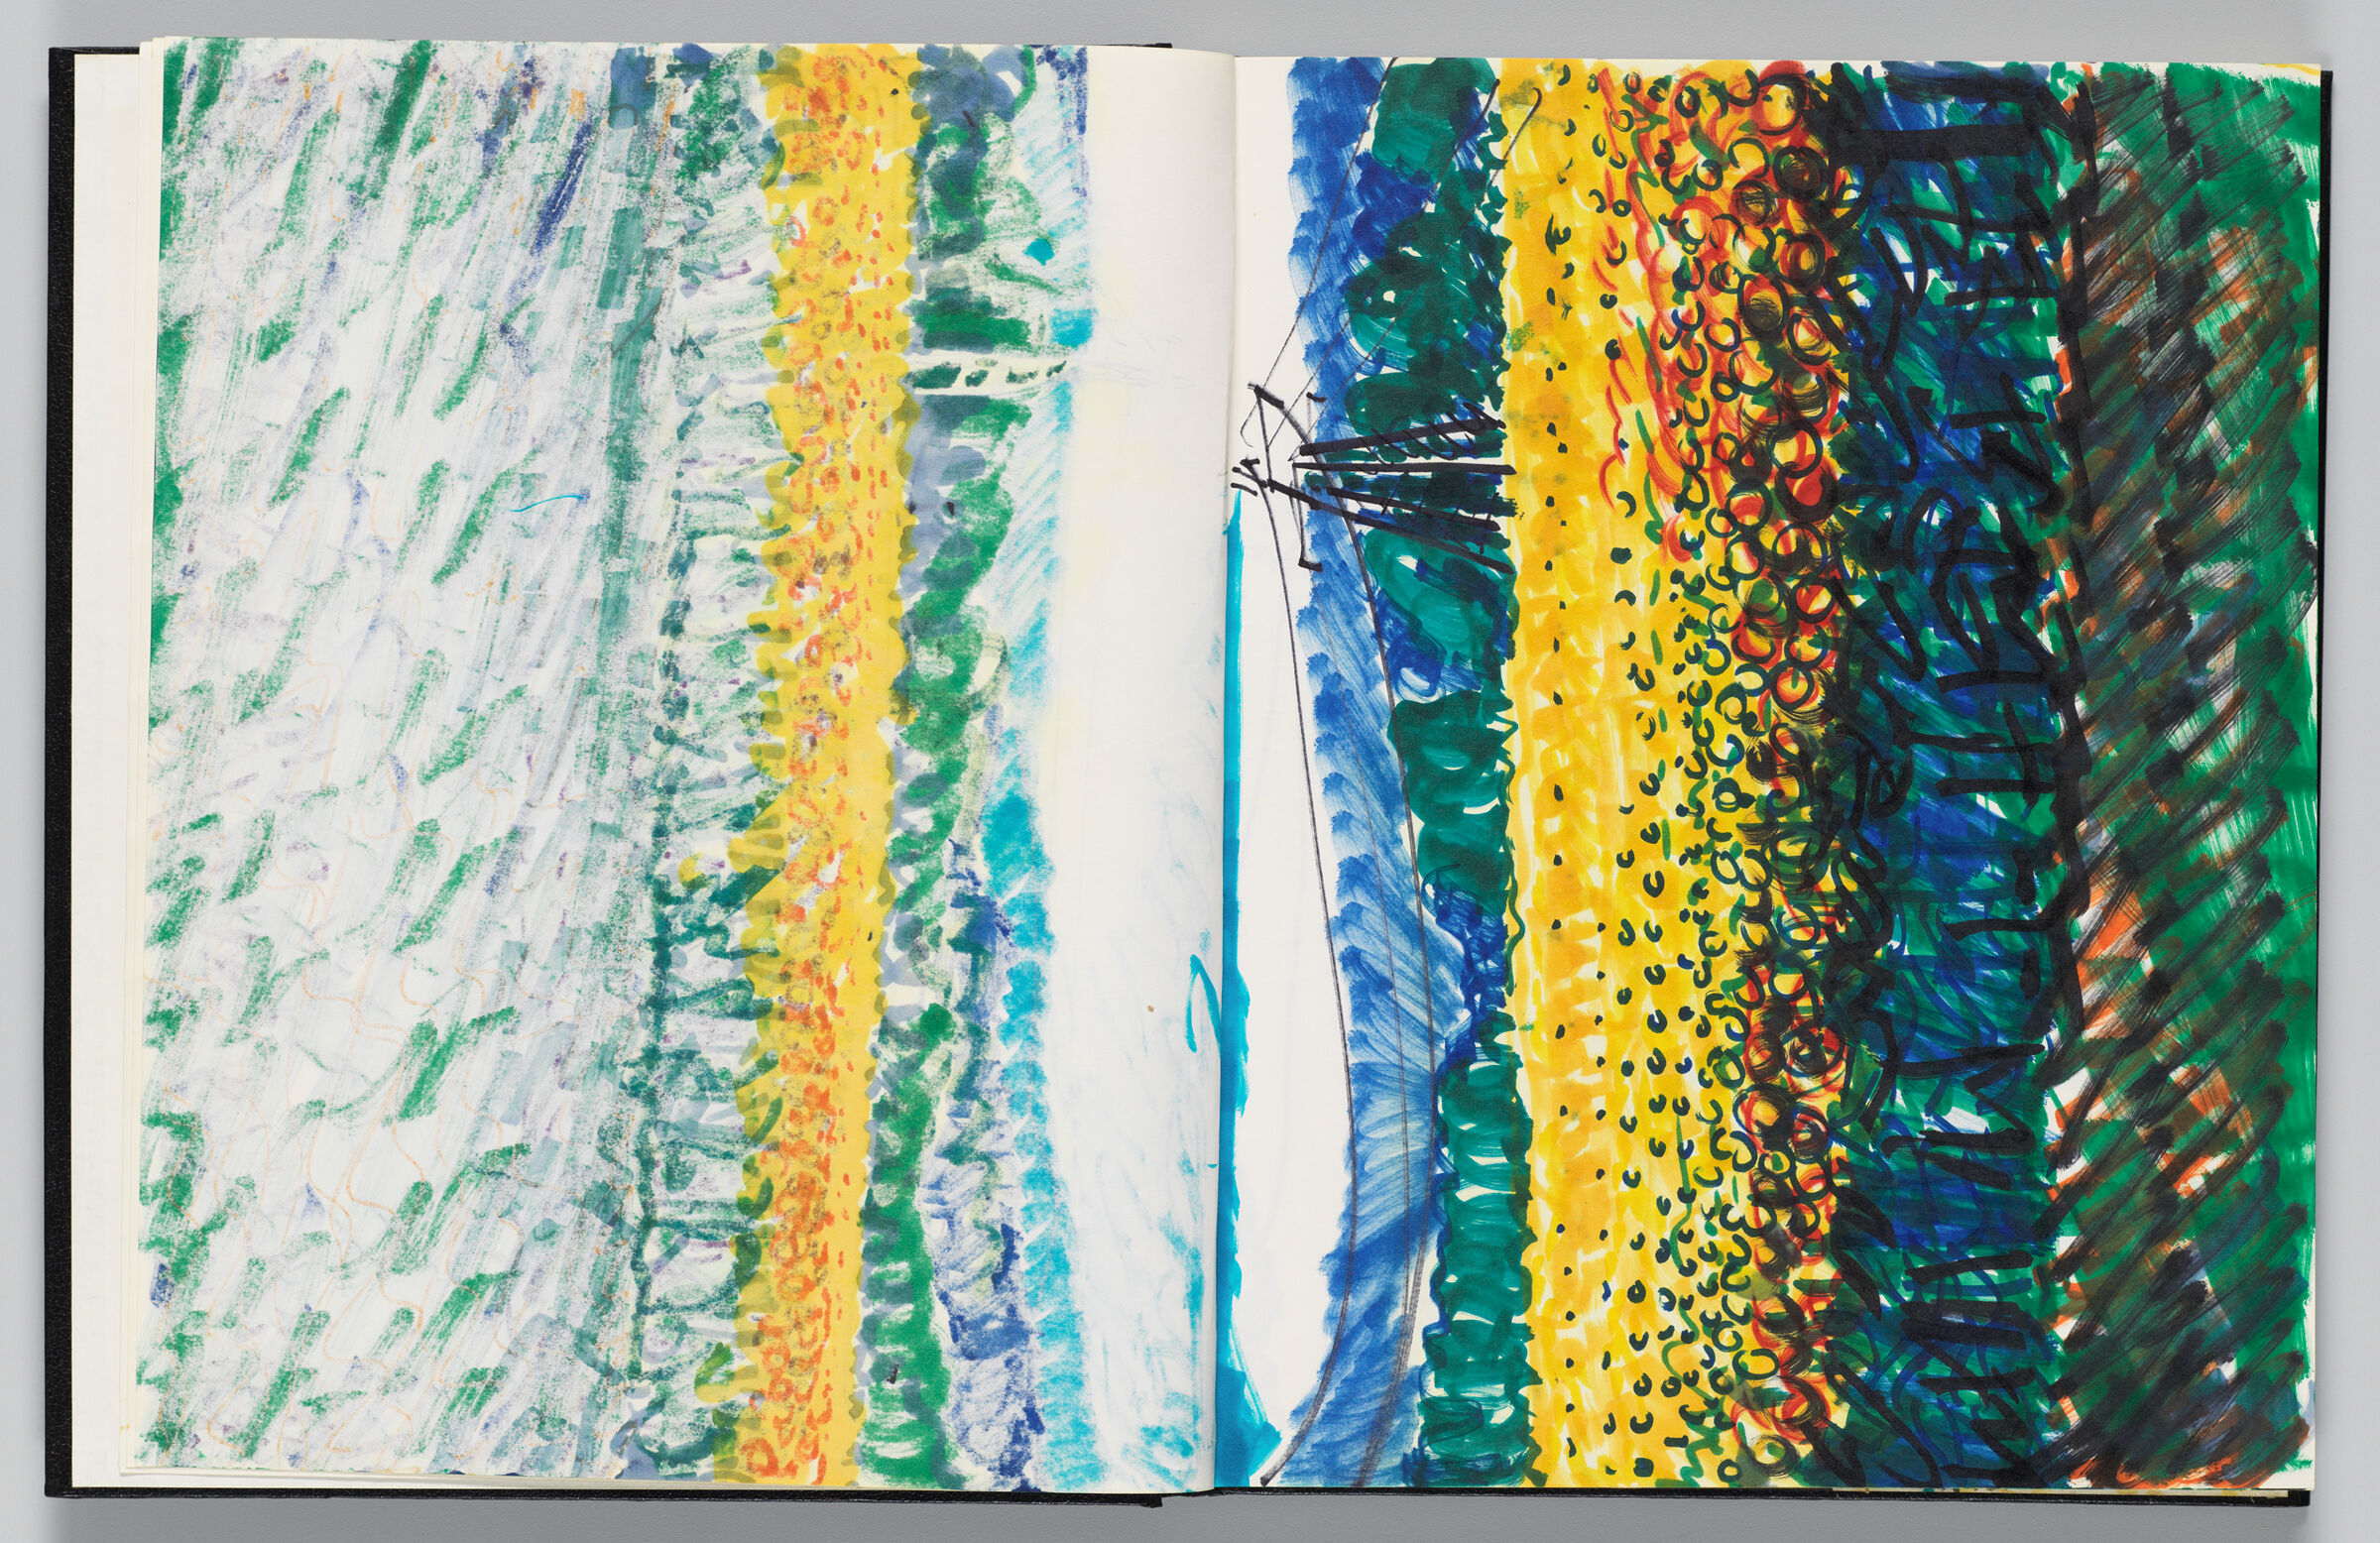 Untitled (Bleed-Through Of Previous Page, Left Page); Untitled (Landscape With Sunflowers, Right Page)